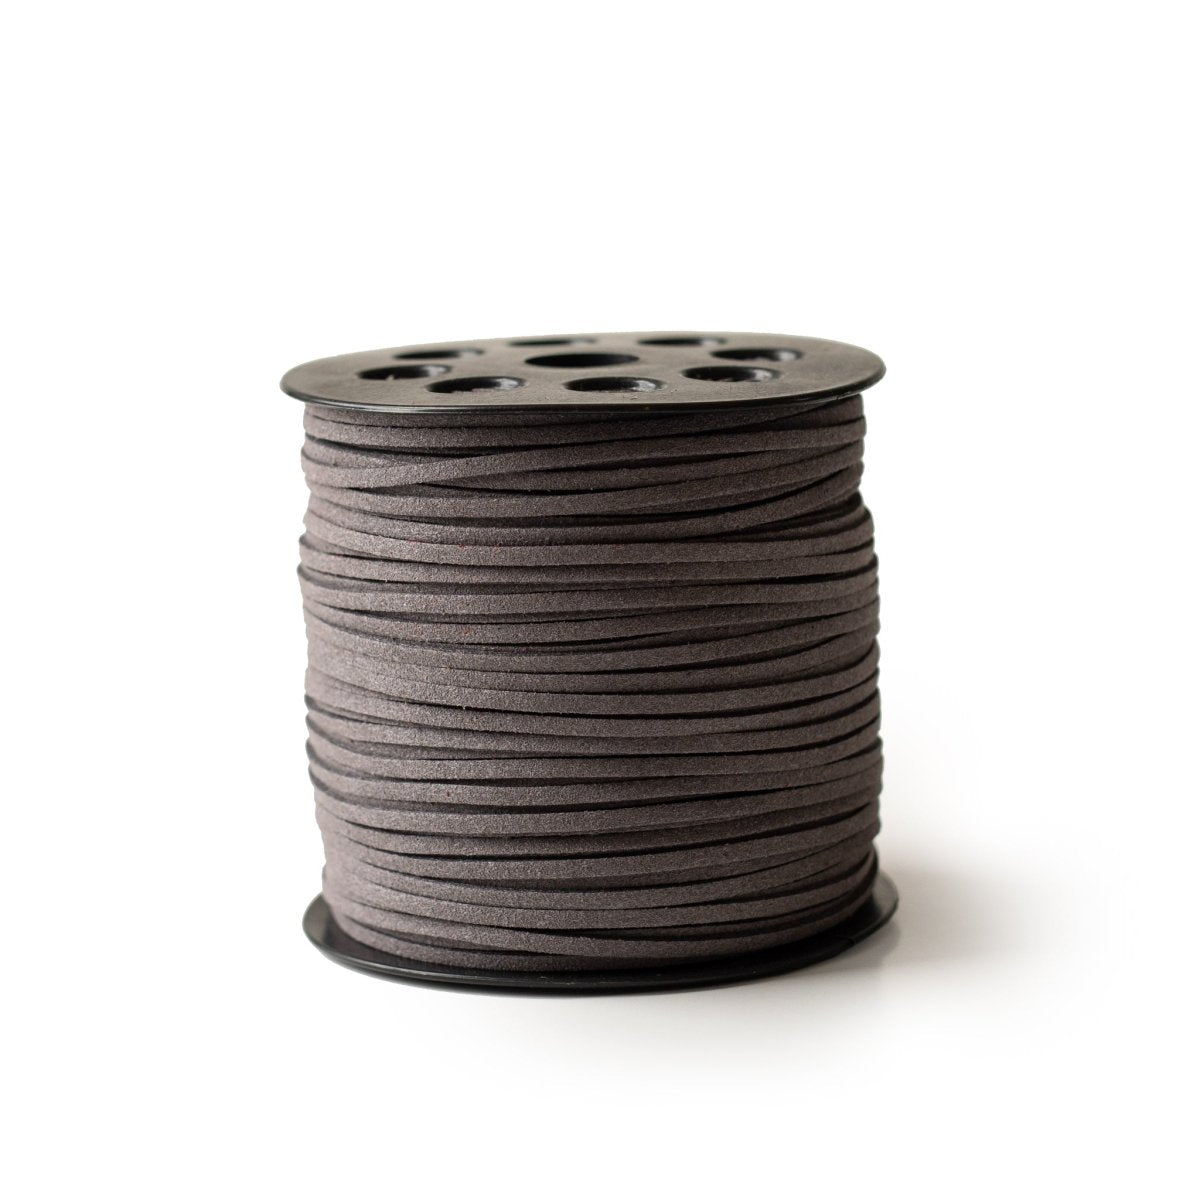 Cording Suede Leather Cord Grey from Cara & Co Craft Supply